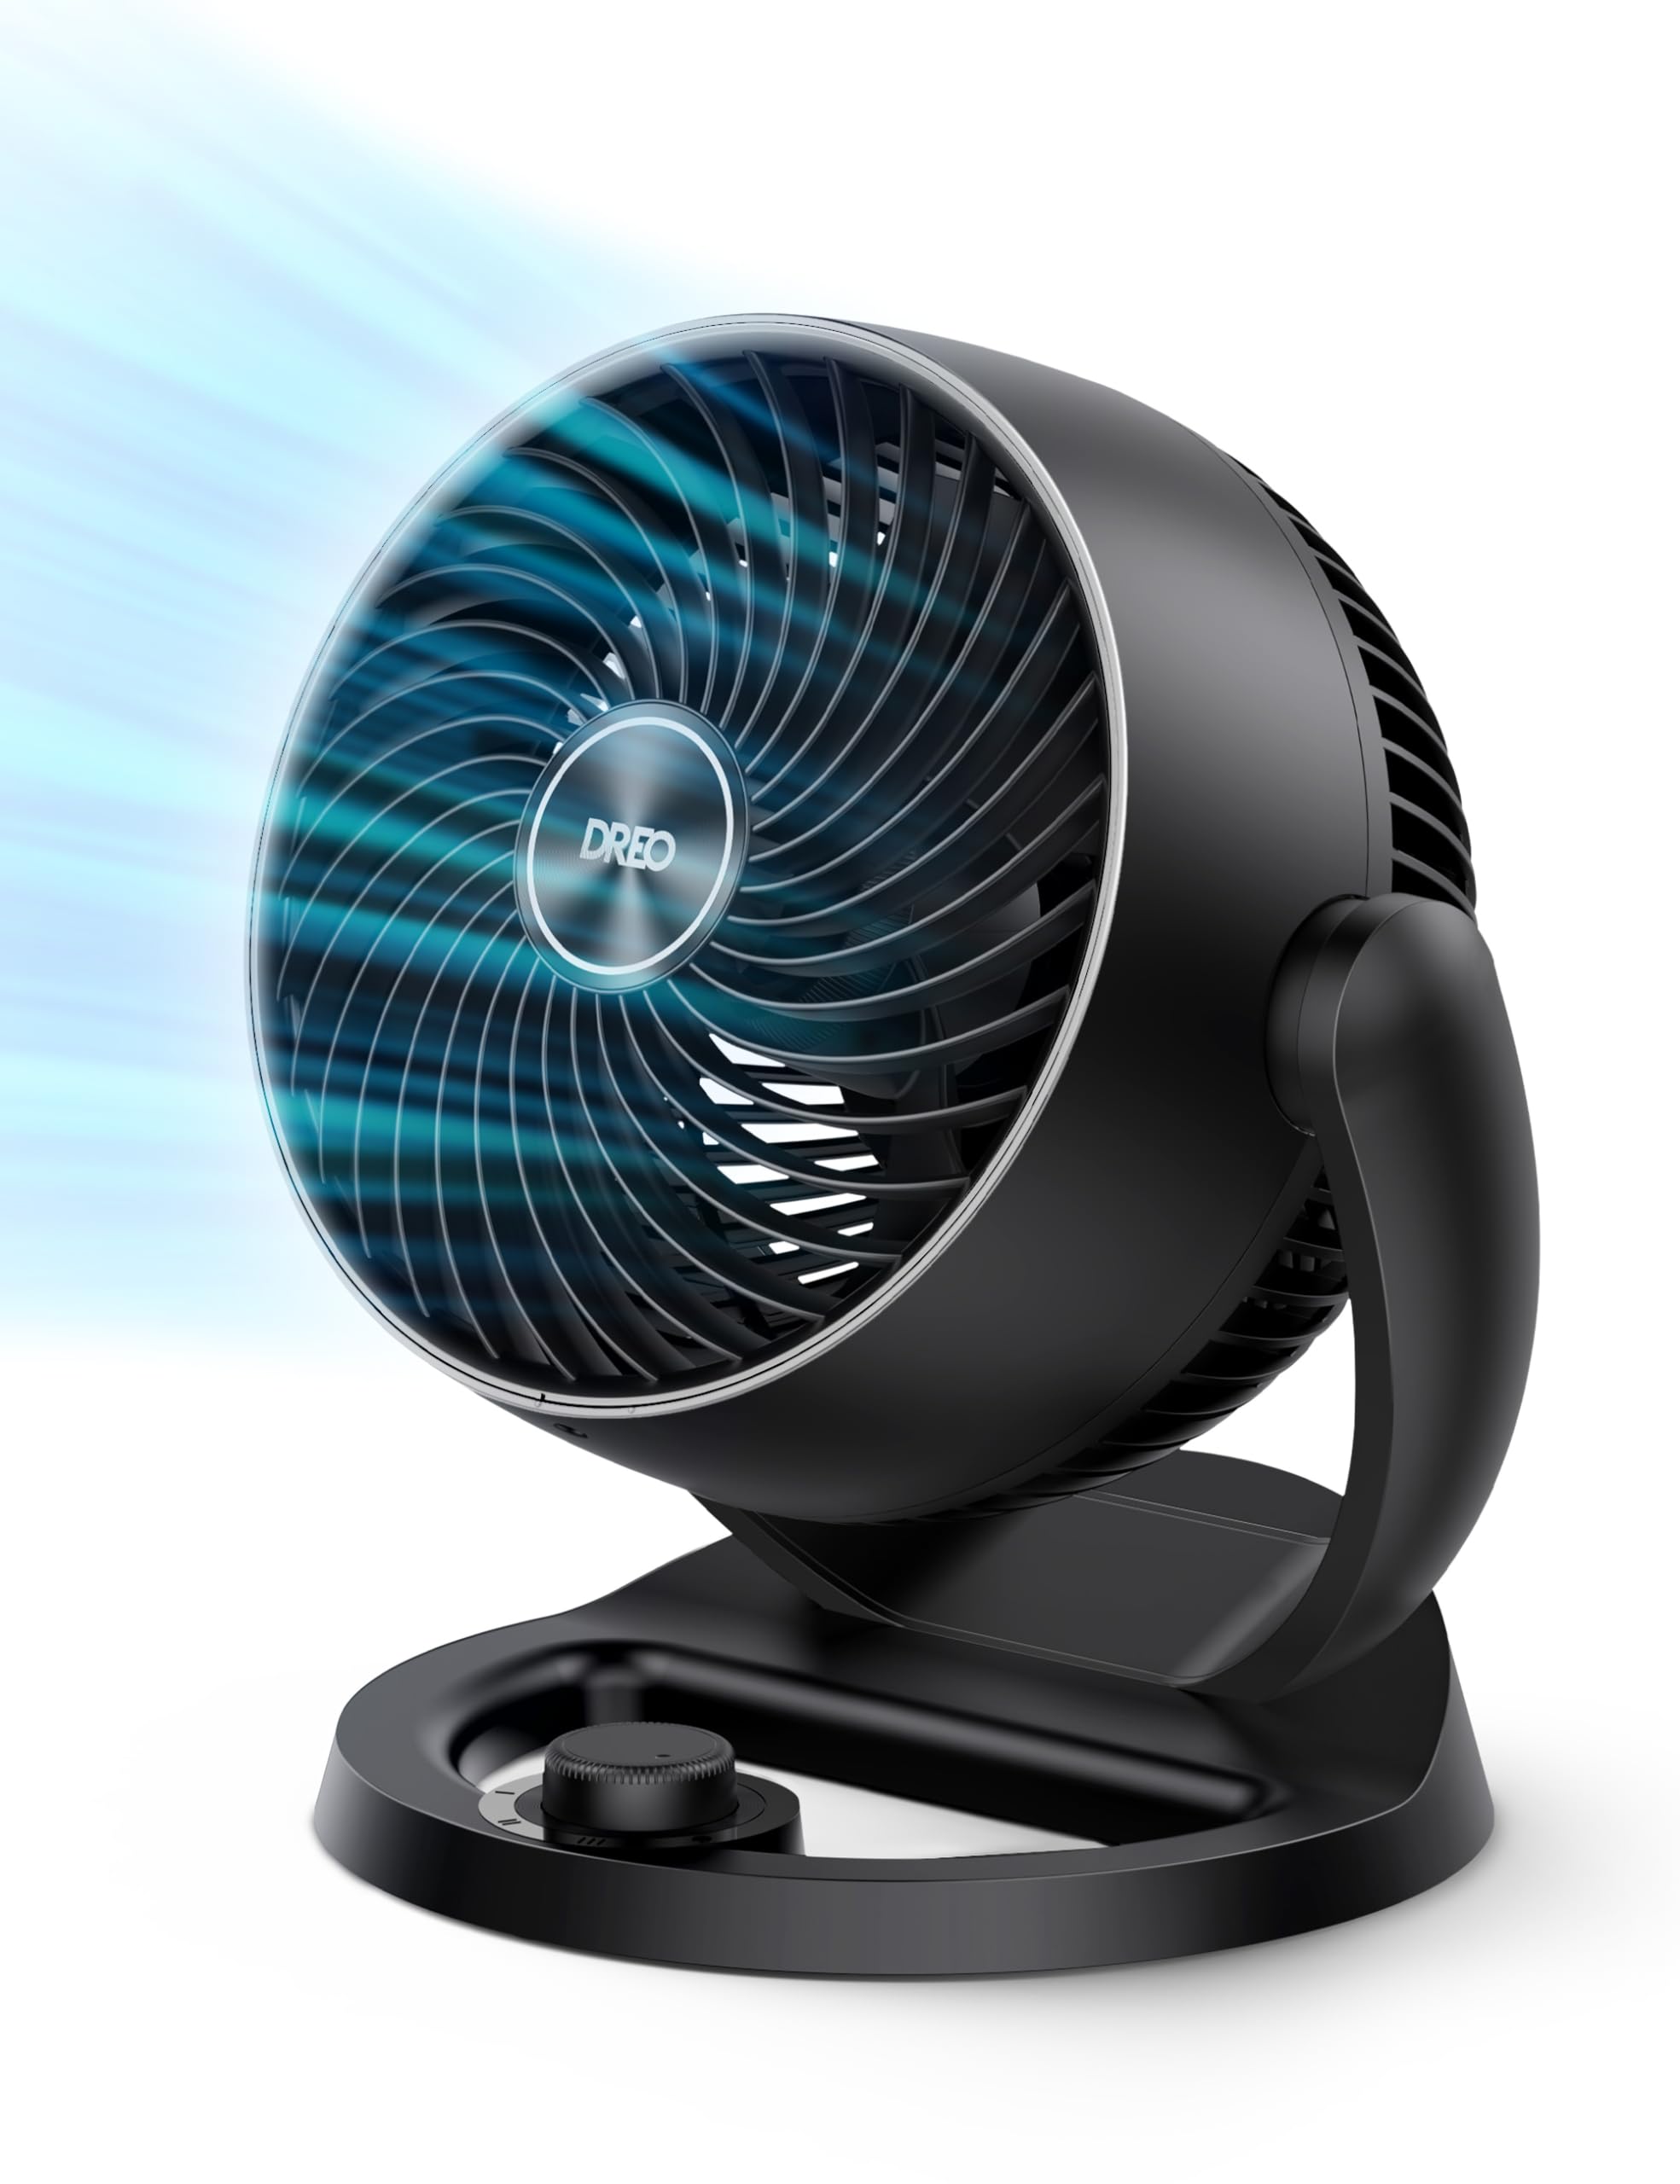 Dreo Fans for Home Bedroom, Table Air Circulator Fan for Whole Room, 9 Inch, 70ft Strong Airflow, 120° adjustable tilt, 28db Low Noise, Quiet, 3 Speeds, Desk Fan for Office, Kitchen, Home